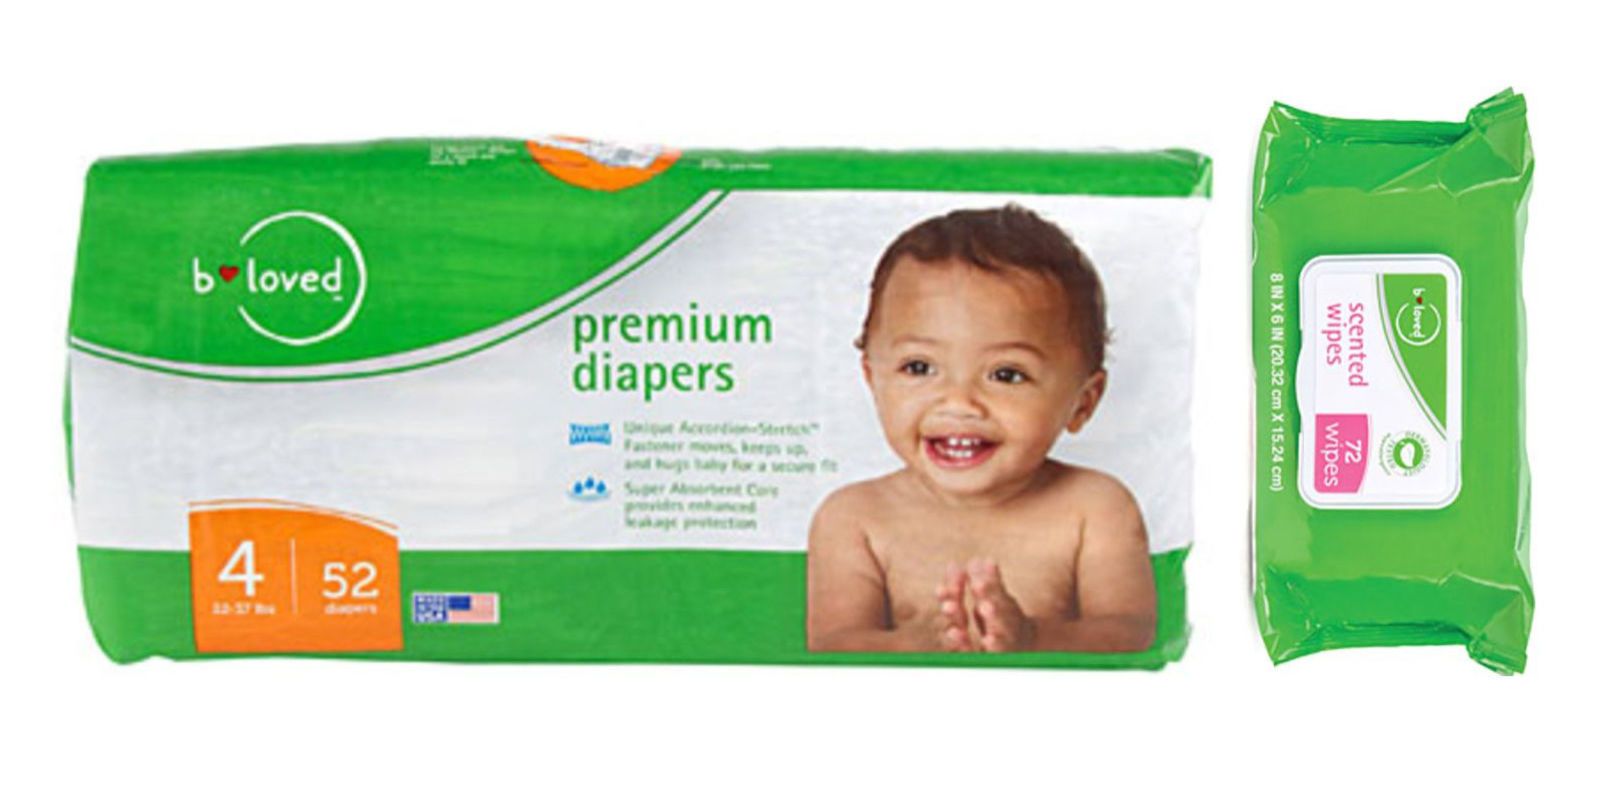 b loved Premium Diapers Review